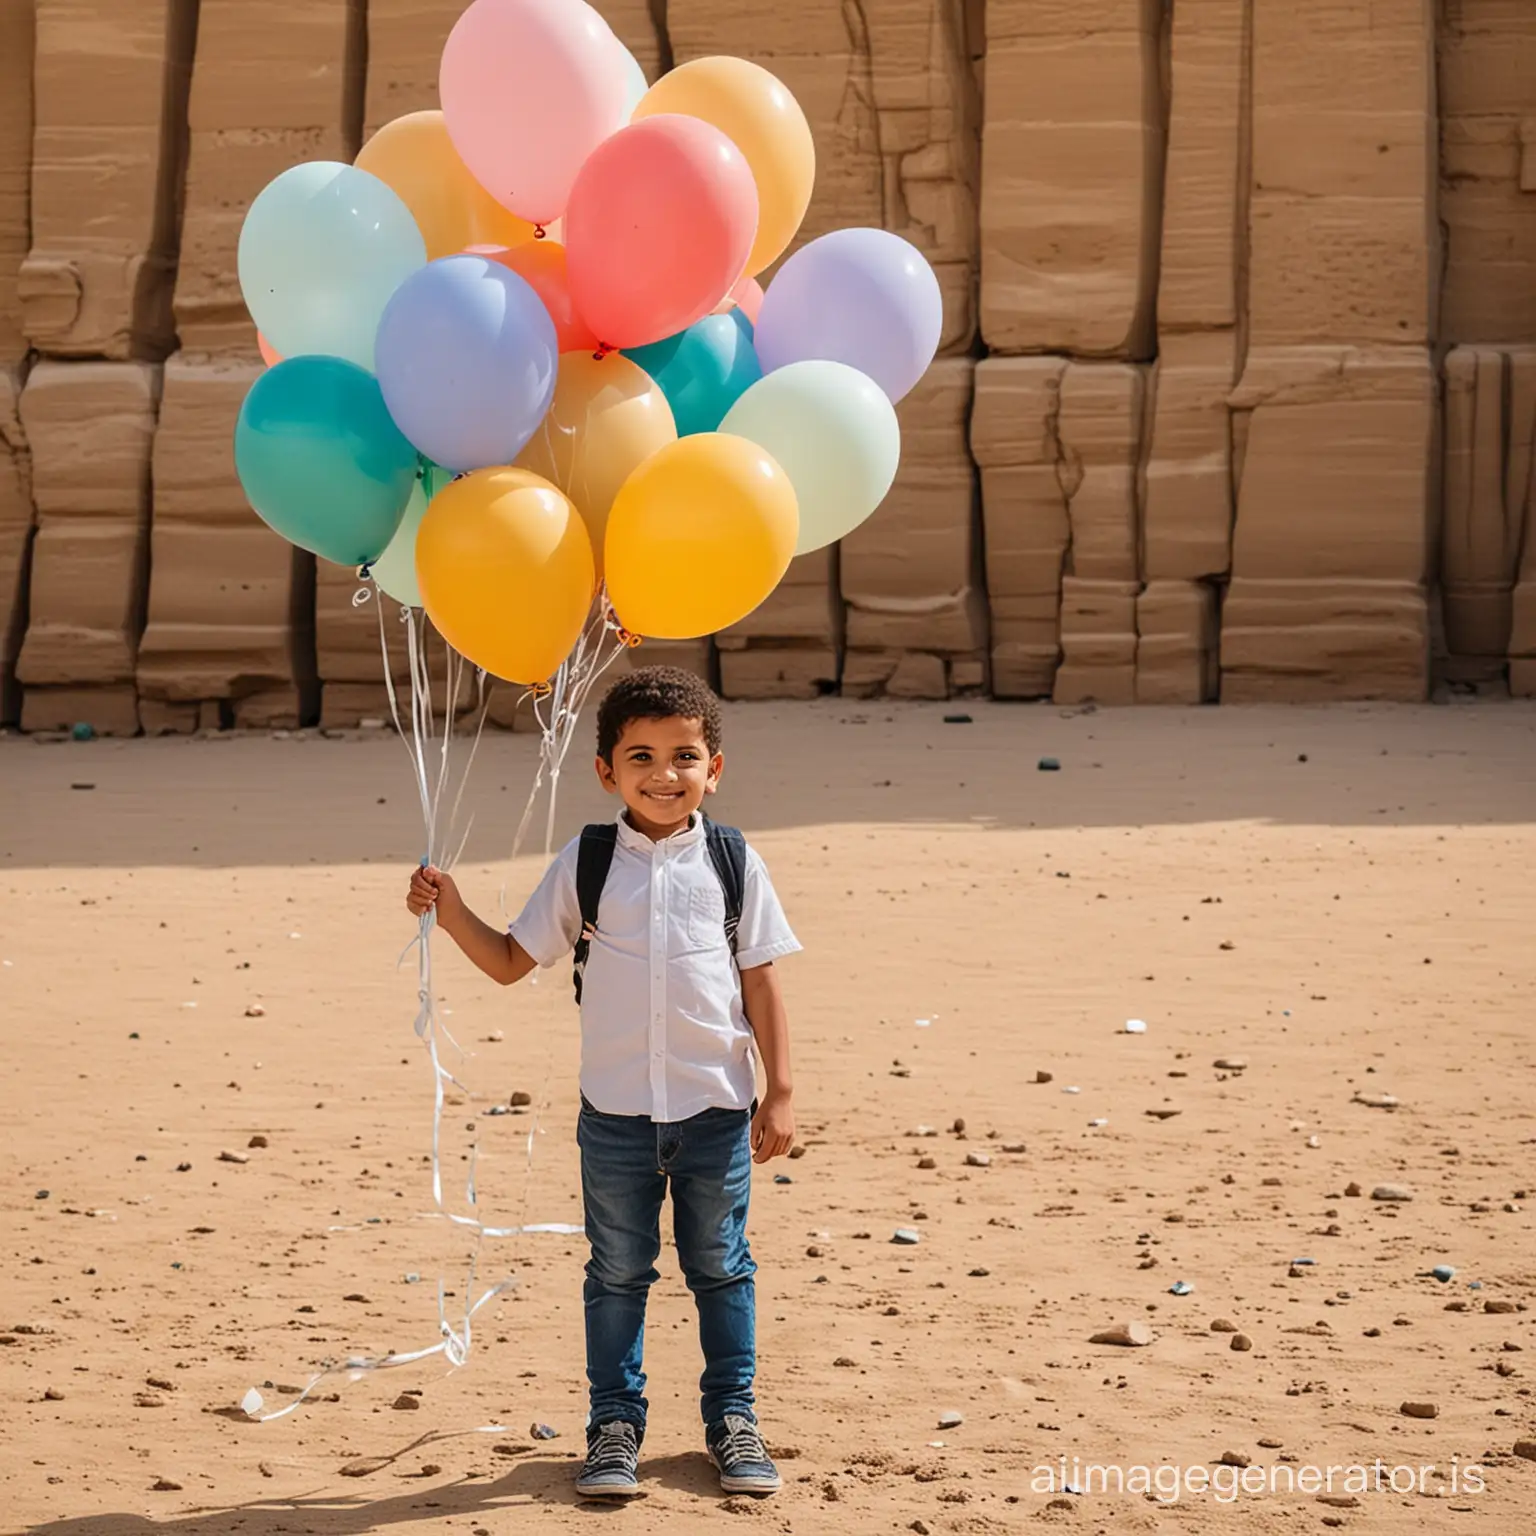 Cheerful-Egyptian-Child-Holding-Colorful-Balloons